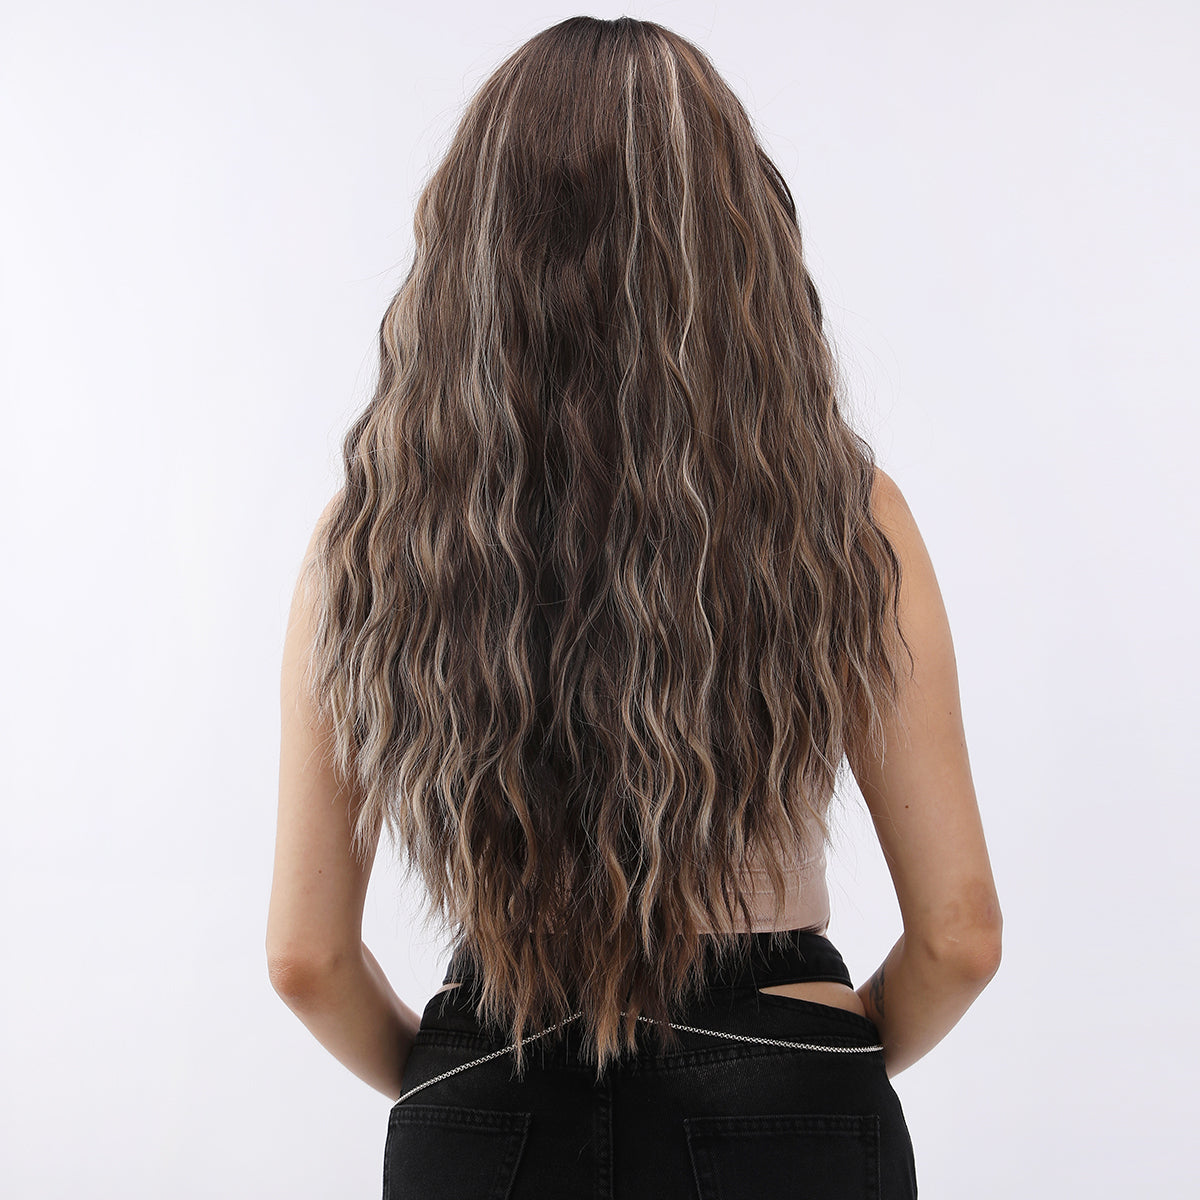 [Selena] 26-inch Ombre Brown Loose Wave without Bangs (Synthetic Lace Front Wig)